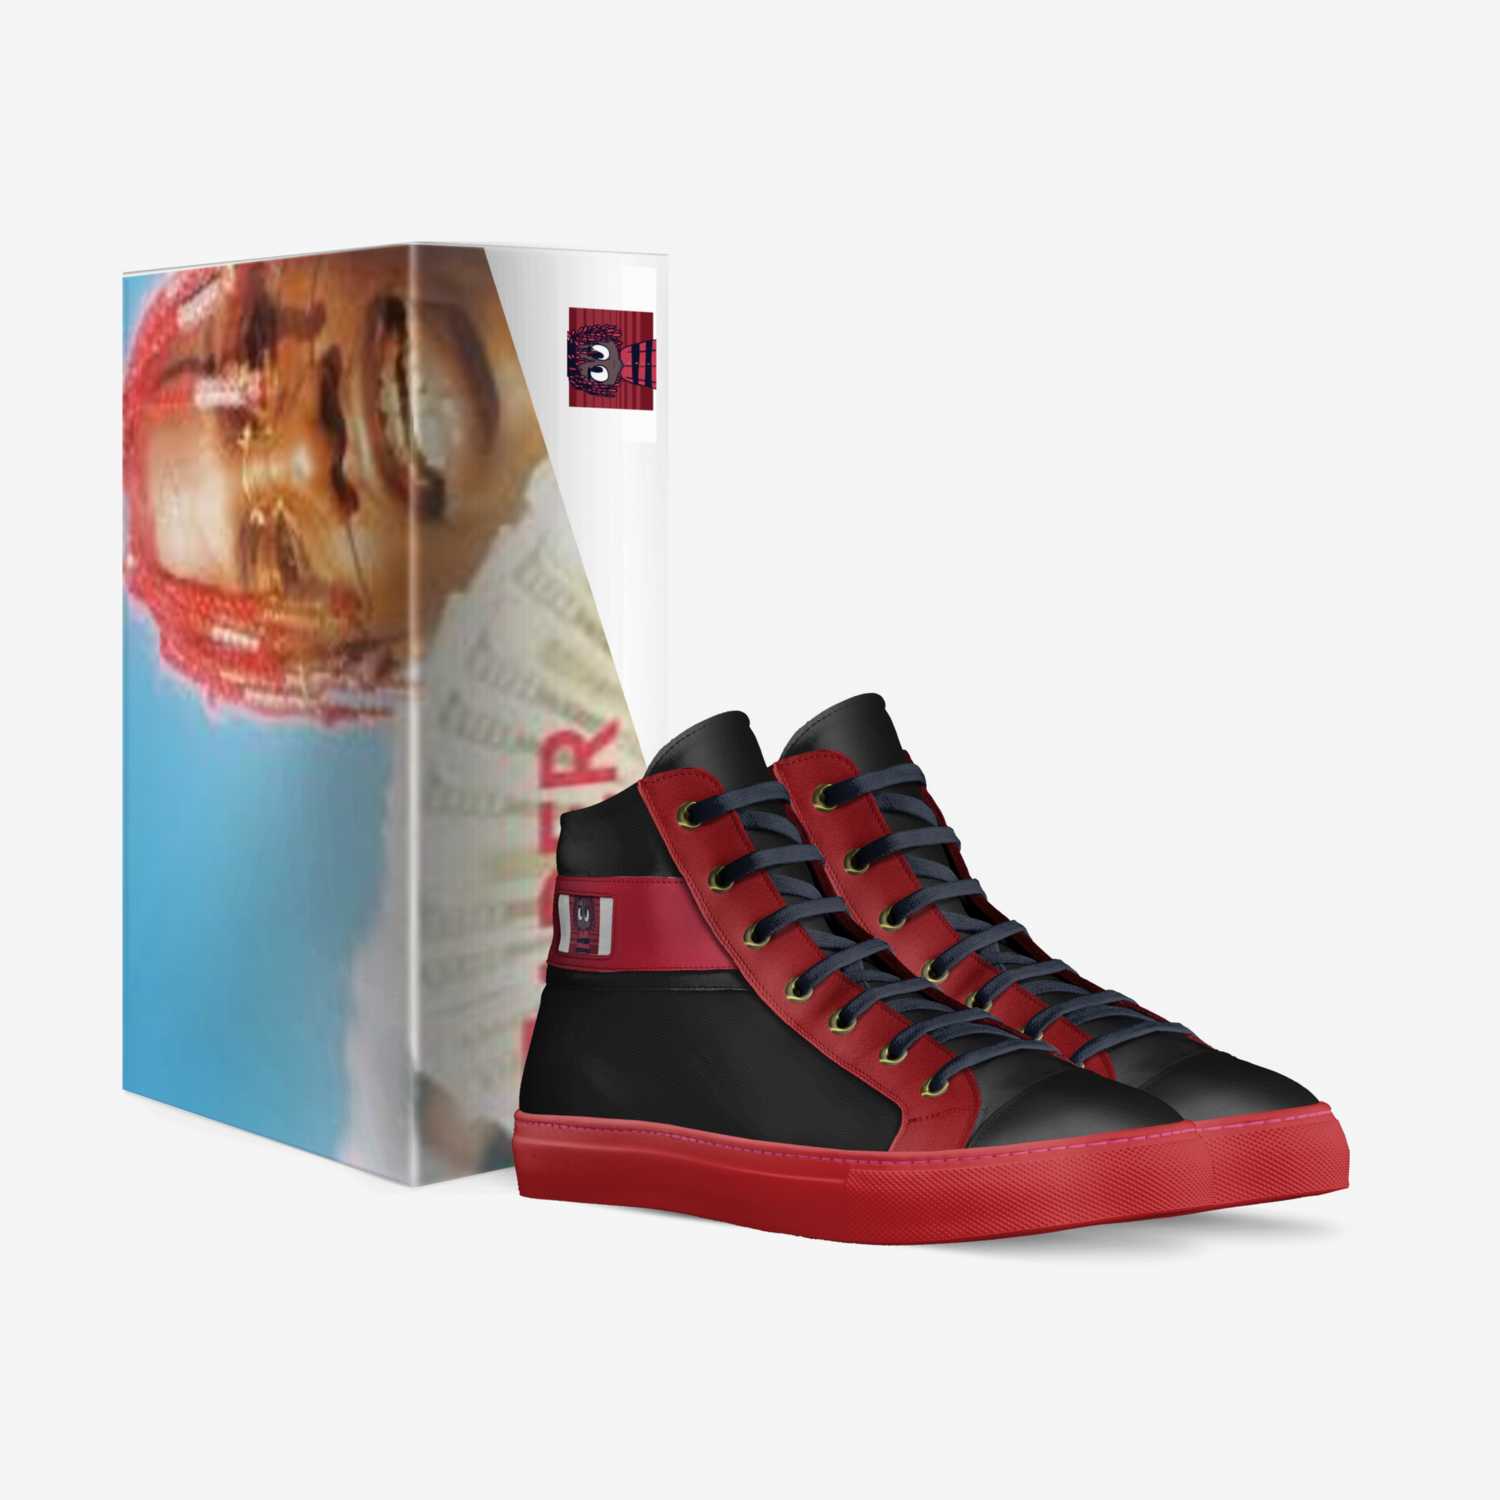 yachty's custom made in Italy shoes by Zamir Gilbert Randolph Nelson | Box view